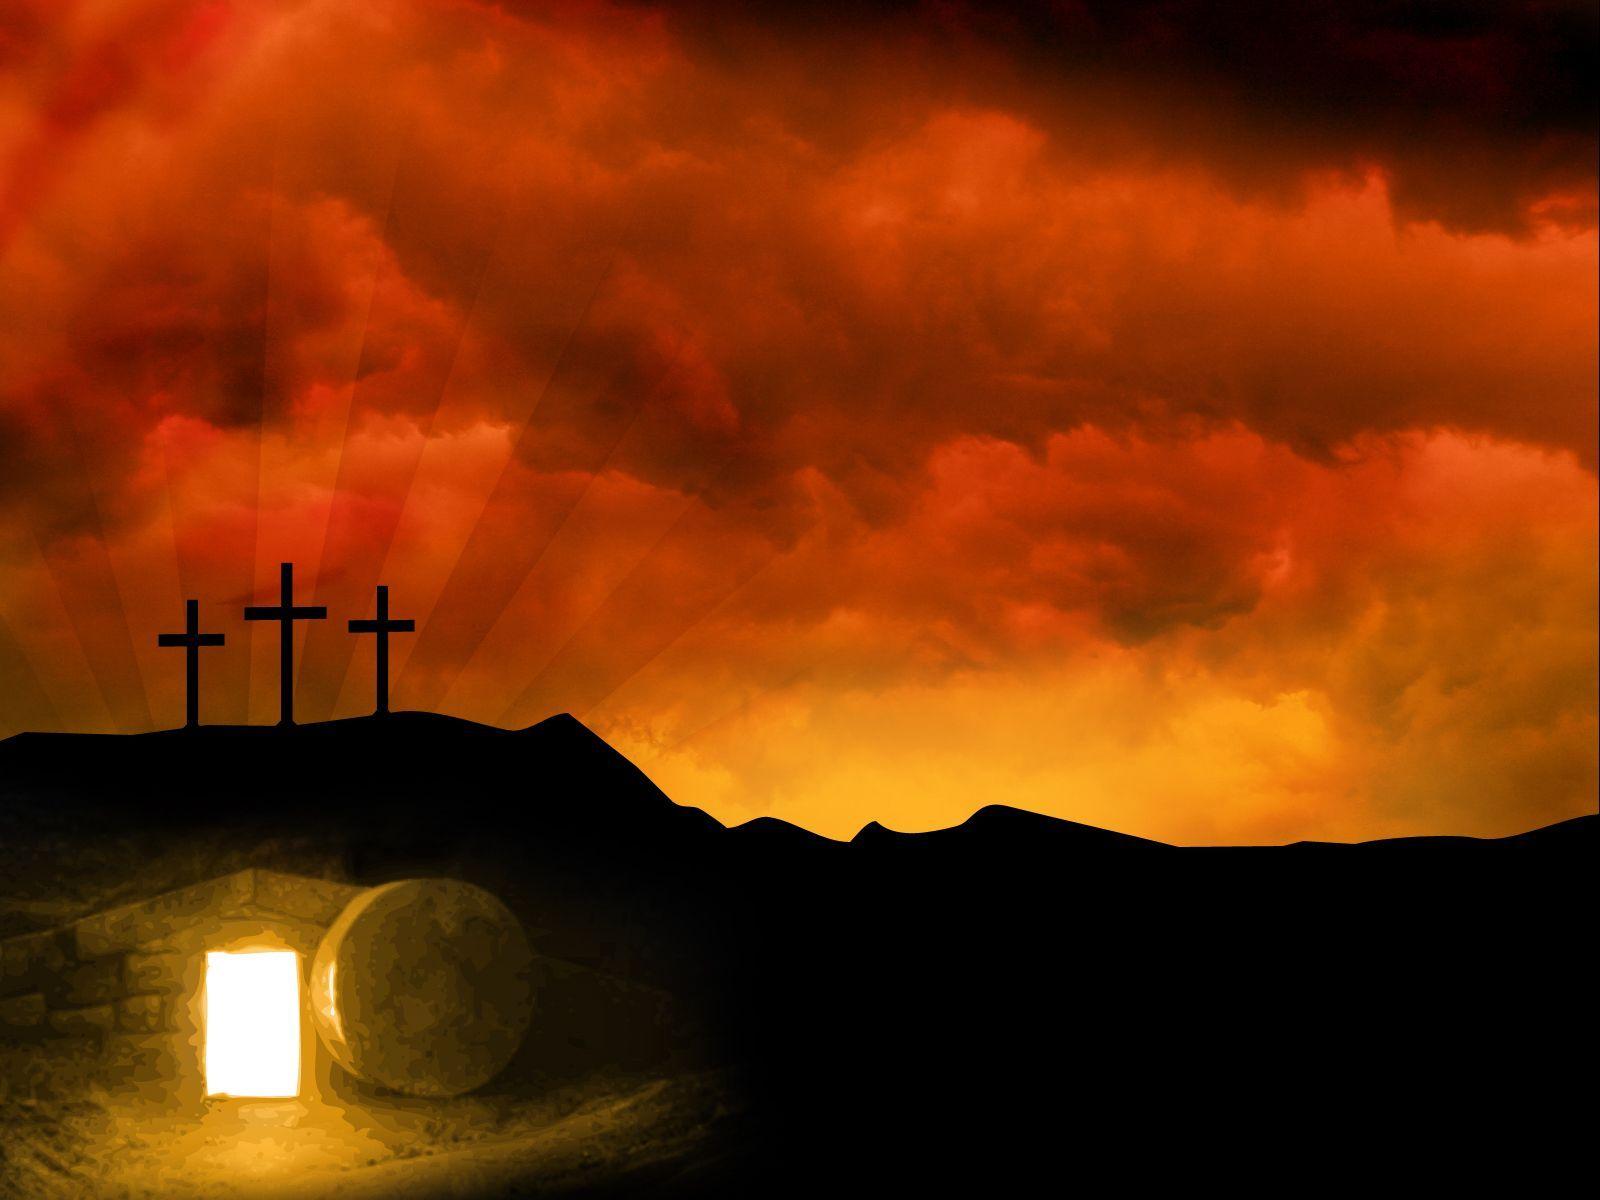 Easter Musical, Sunday April 13, 2014, 6:00 pm